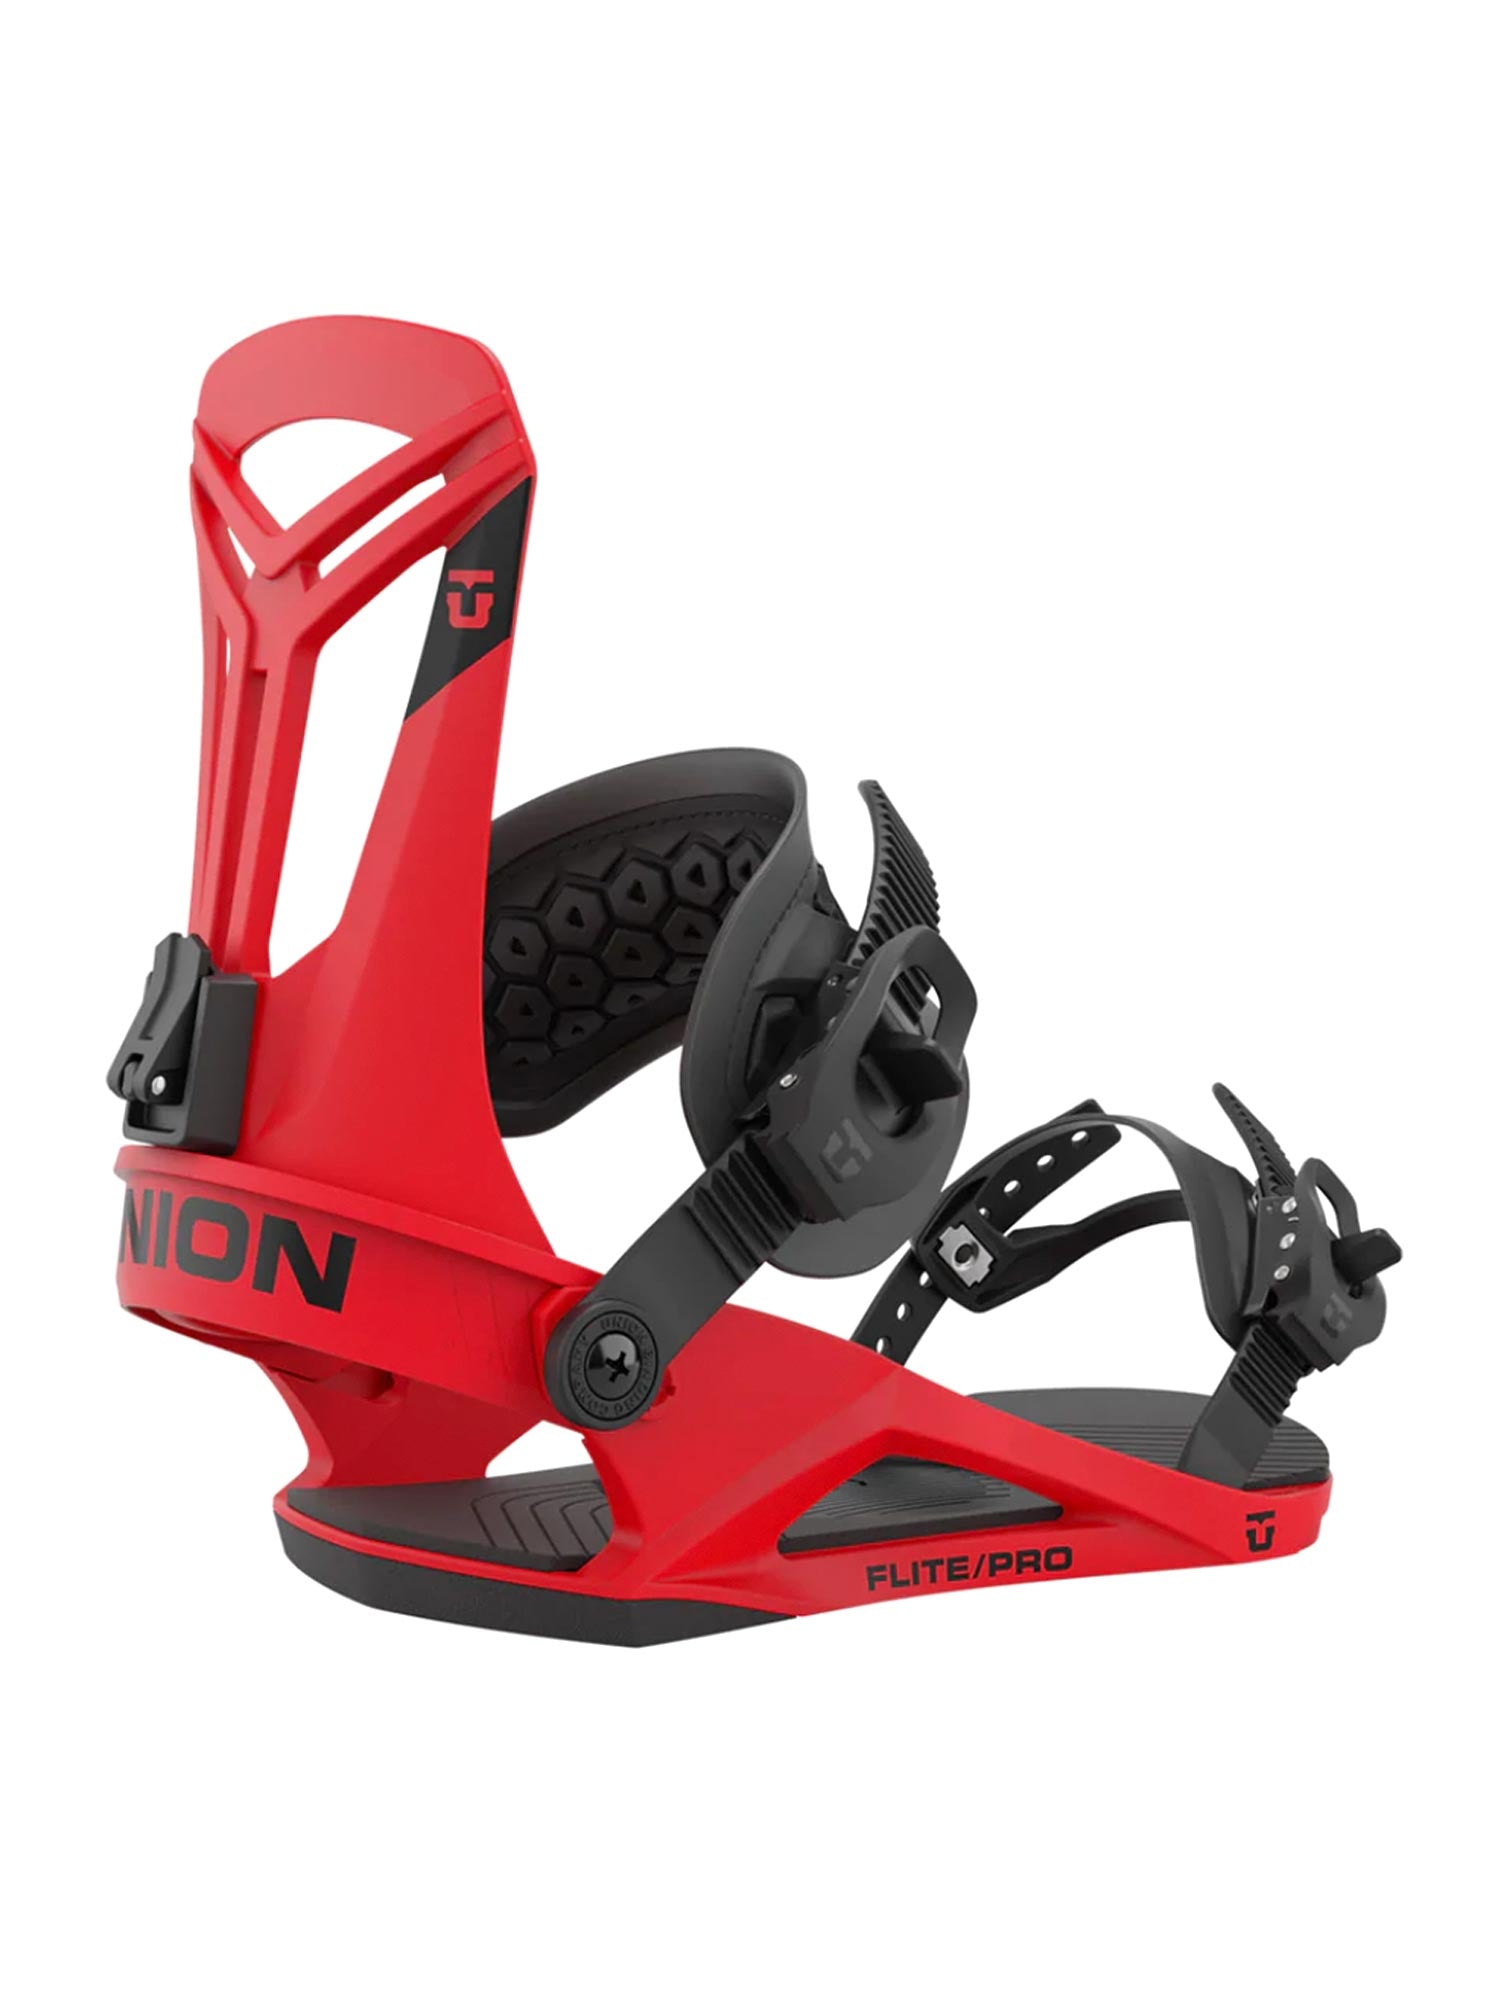 Union Flite Pro snowboard bindings - red with black accents